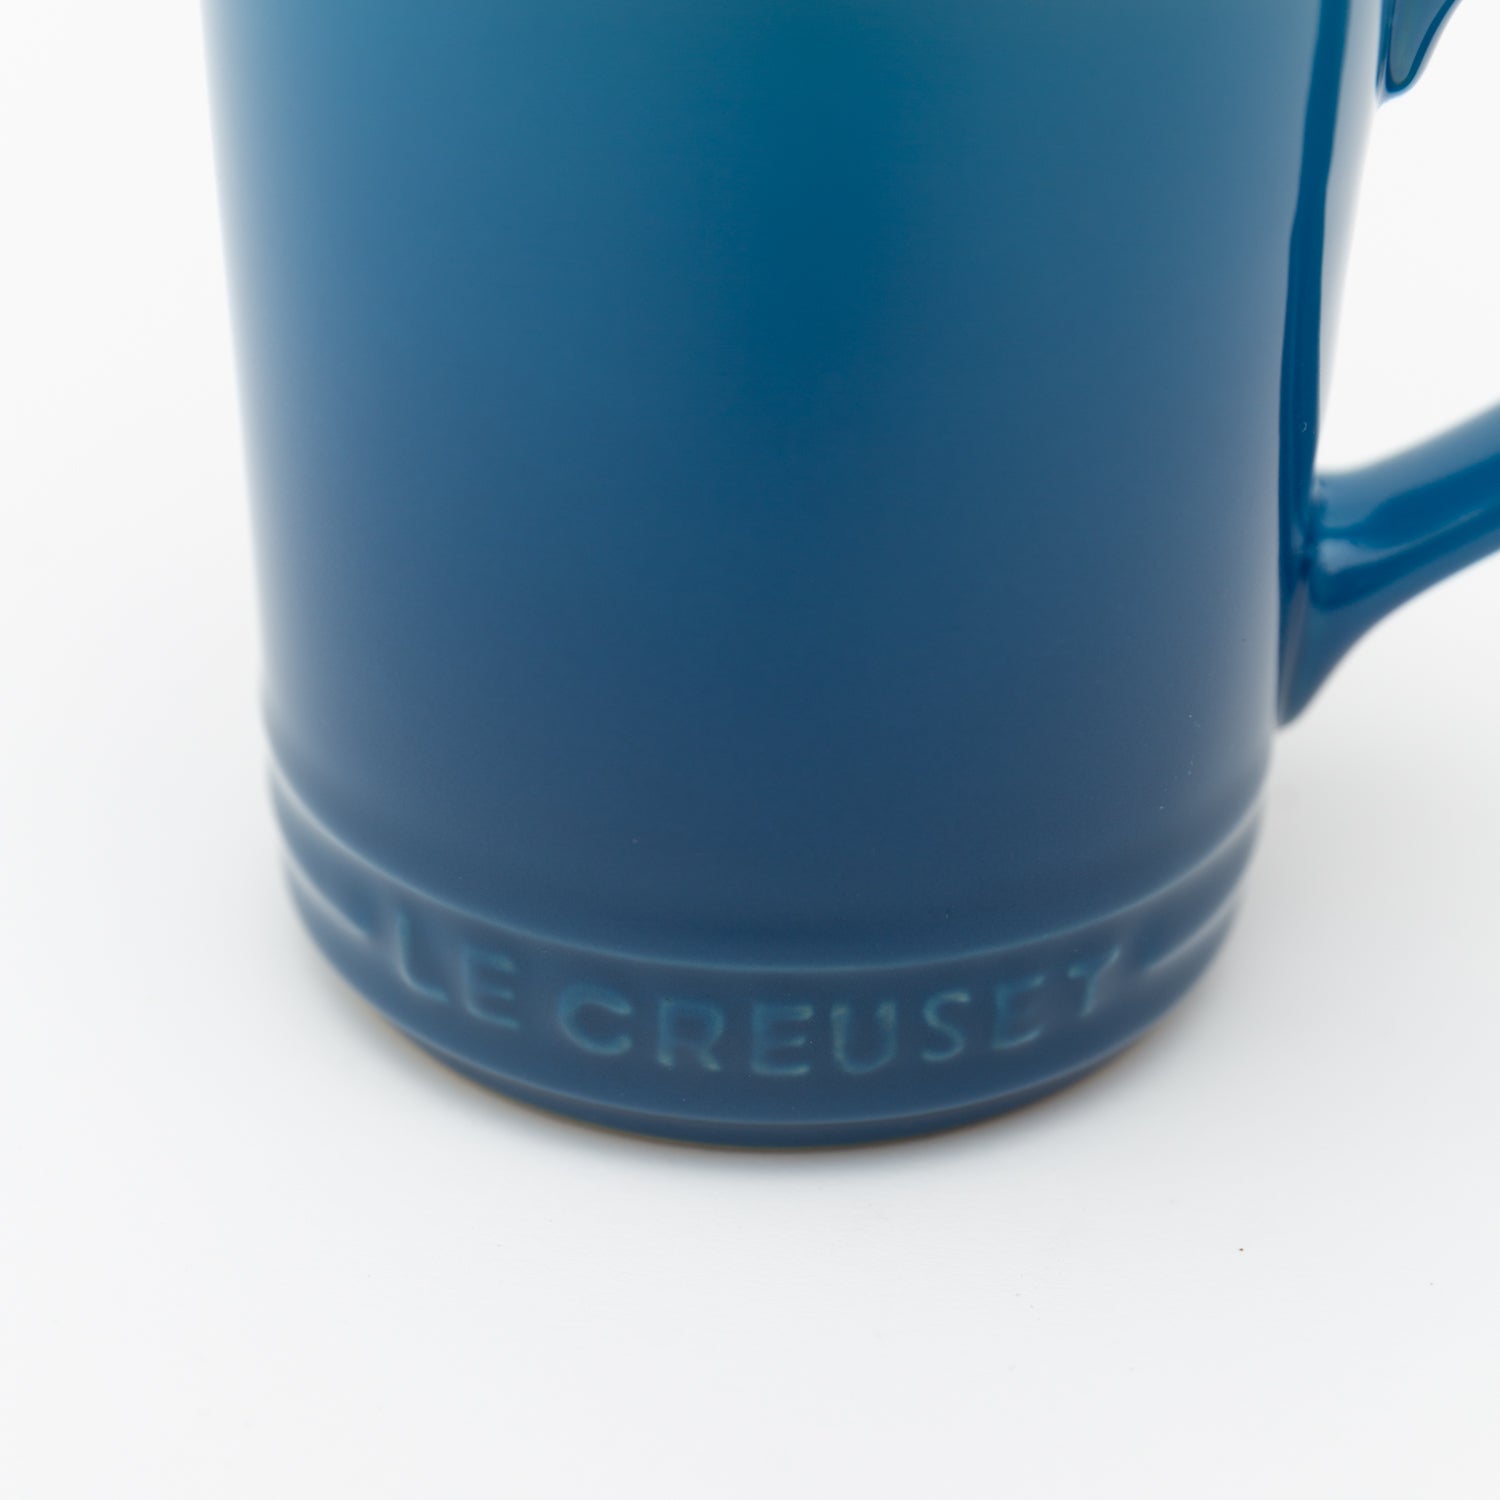 Load image into Gallery viewer, Le Creuset Coffee mug_Blue